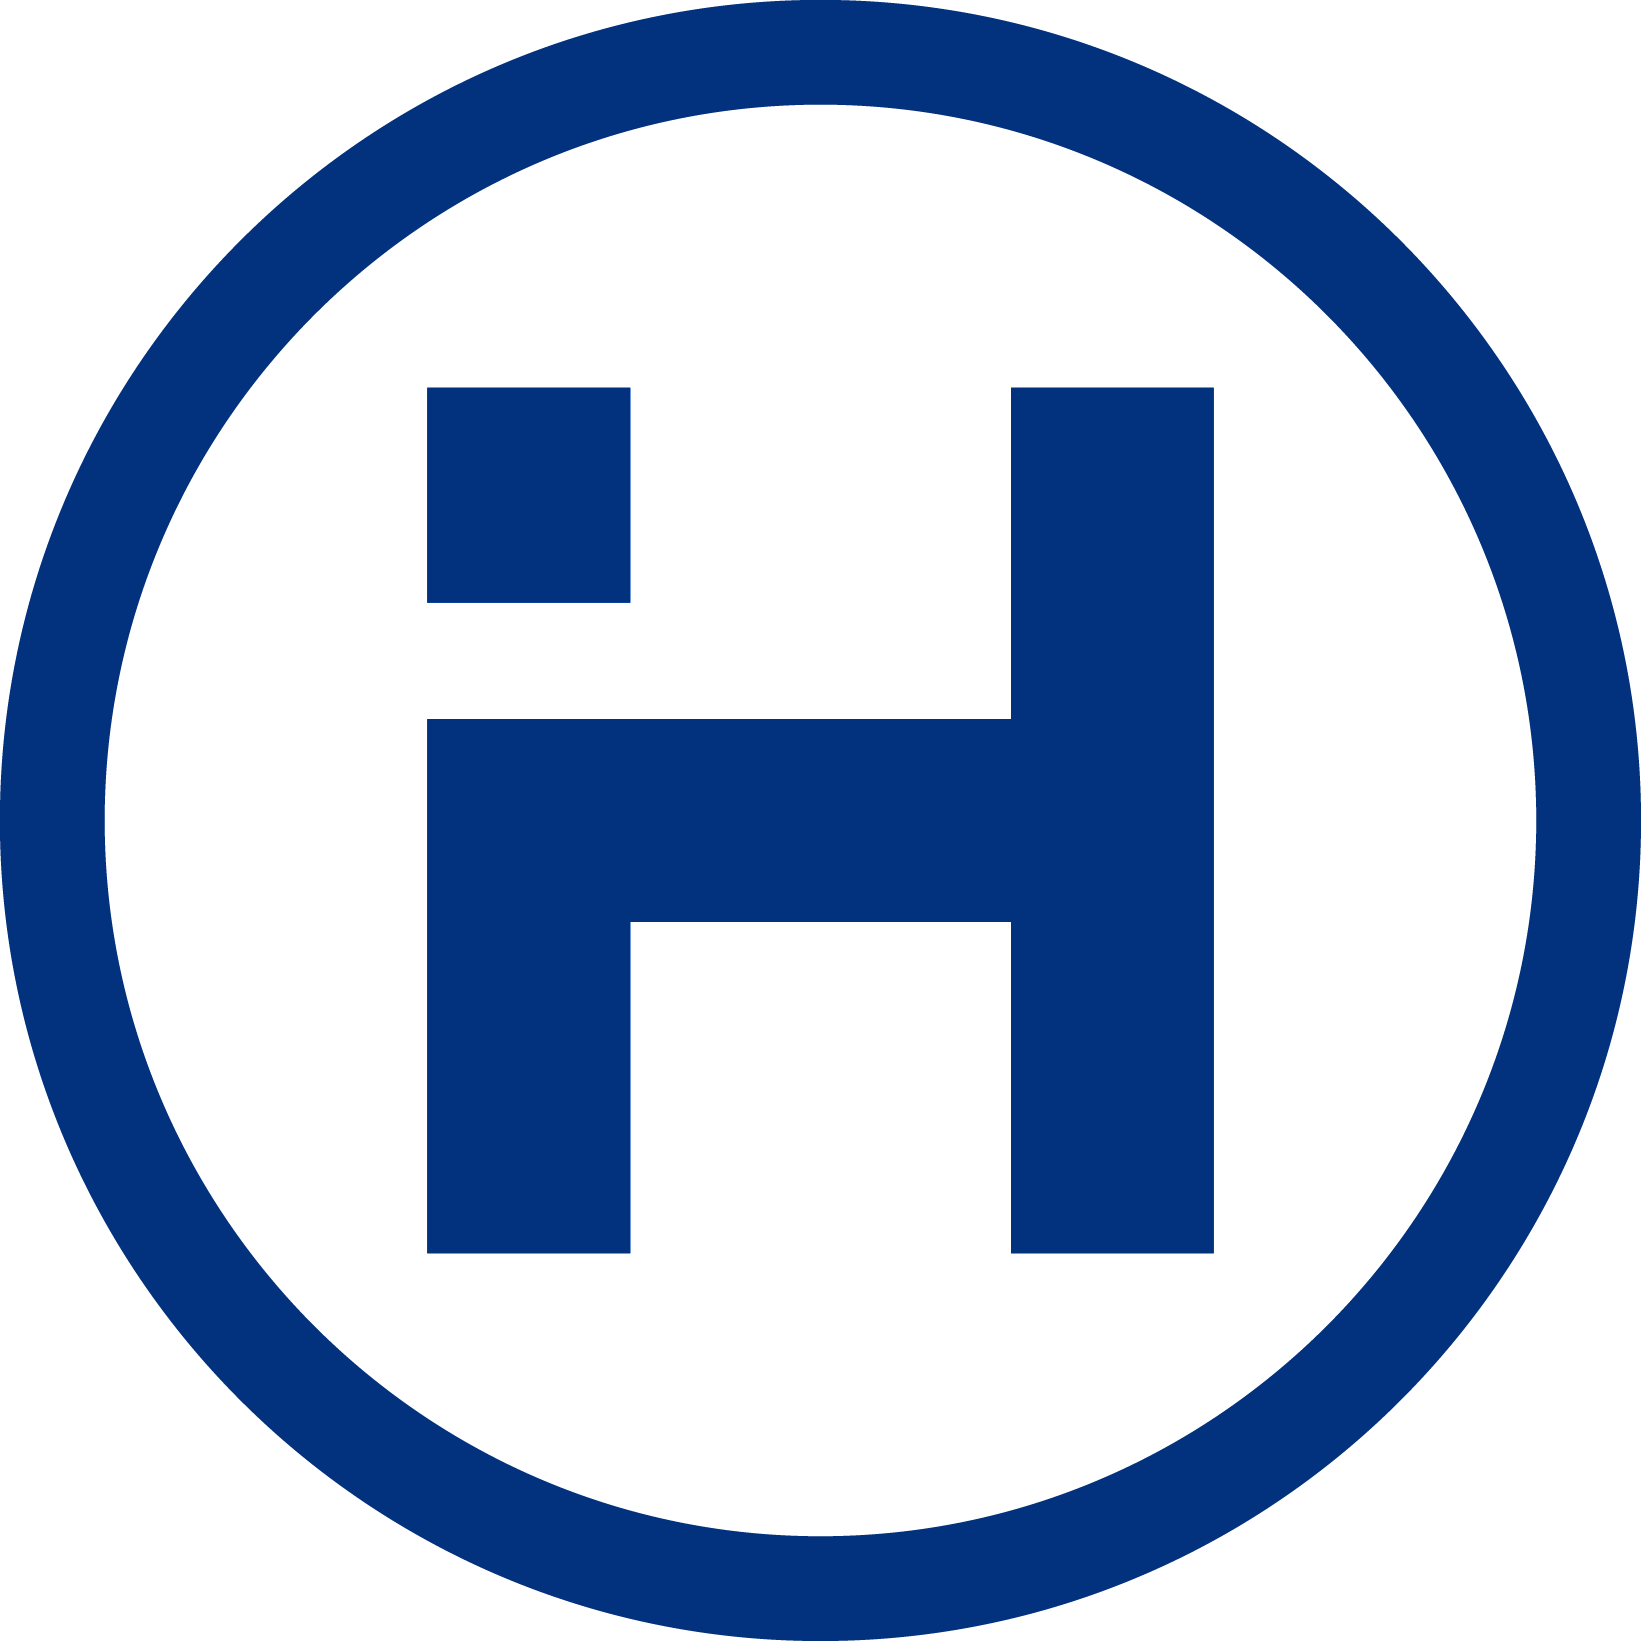 IH logo as Central Image